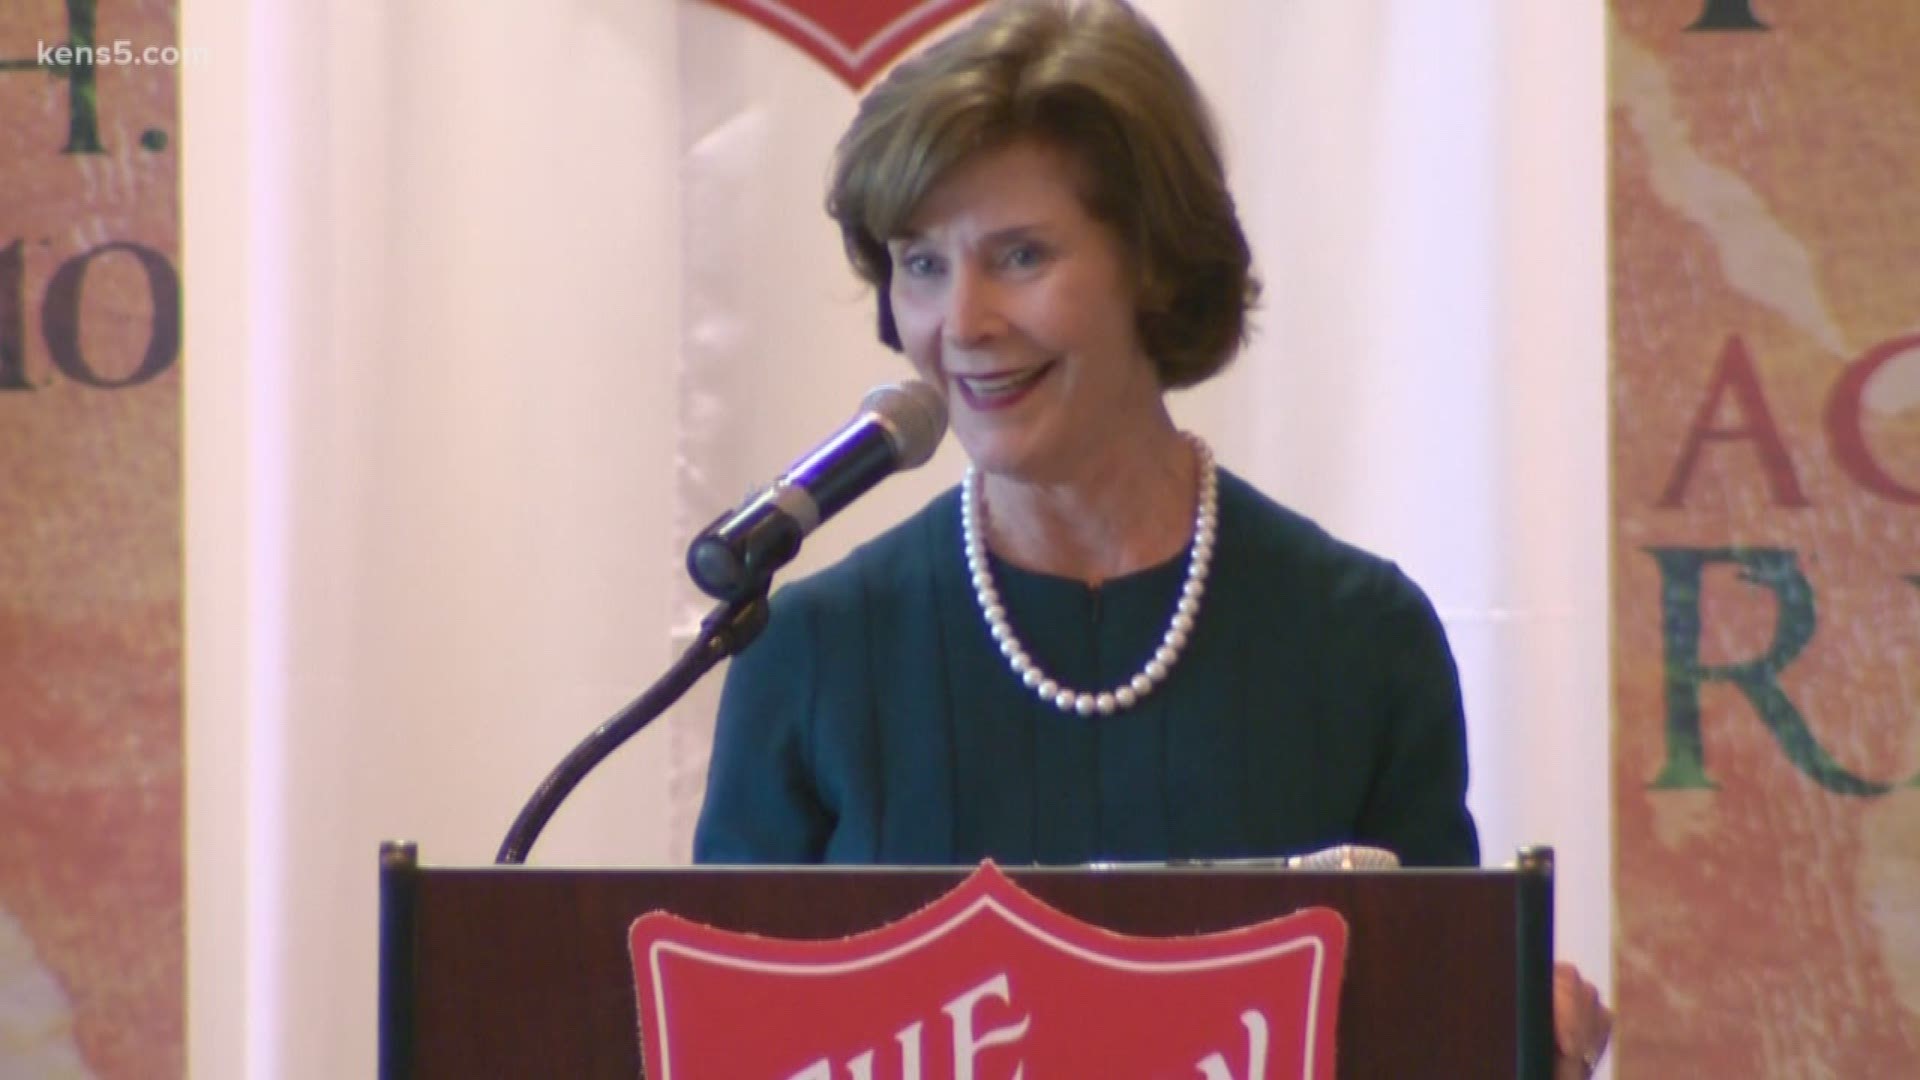 Former First Lady Laura Bush was in San Antonio Tuesday to deliver the keynote address at the Salvation Army's 2019 Annual Lunch, held at the University of the Incarnate Word.